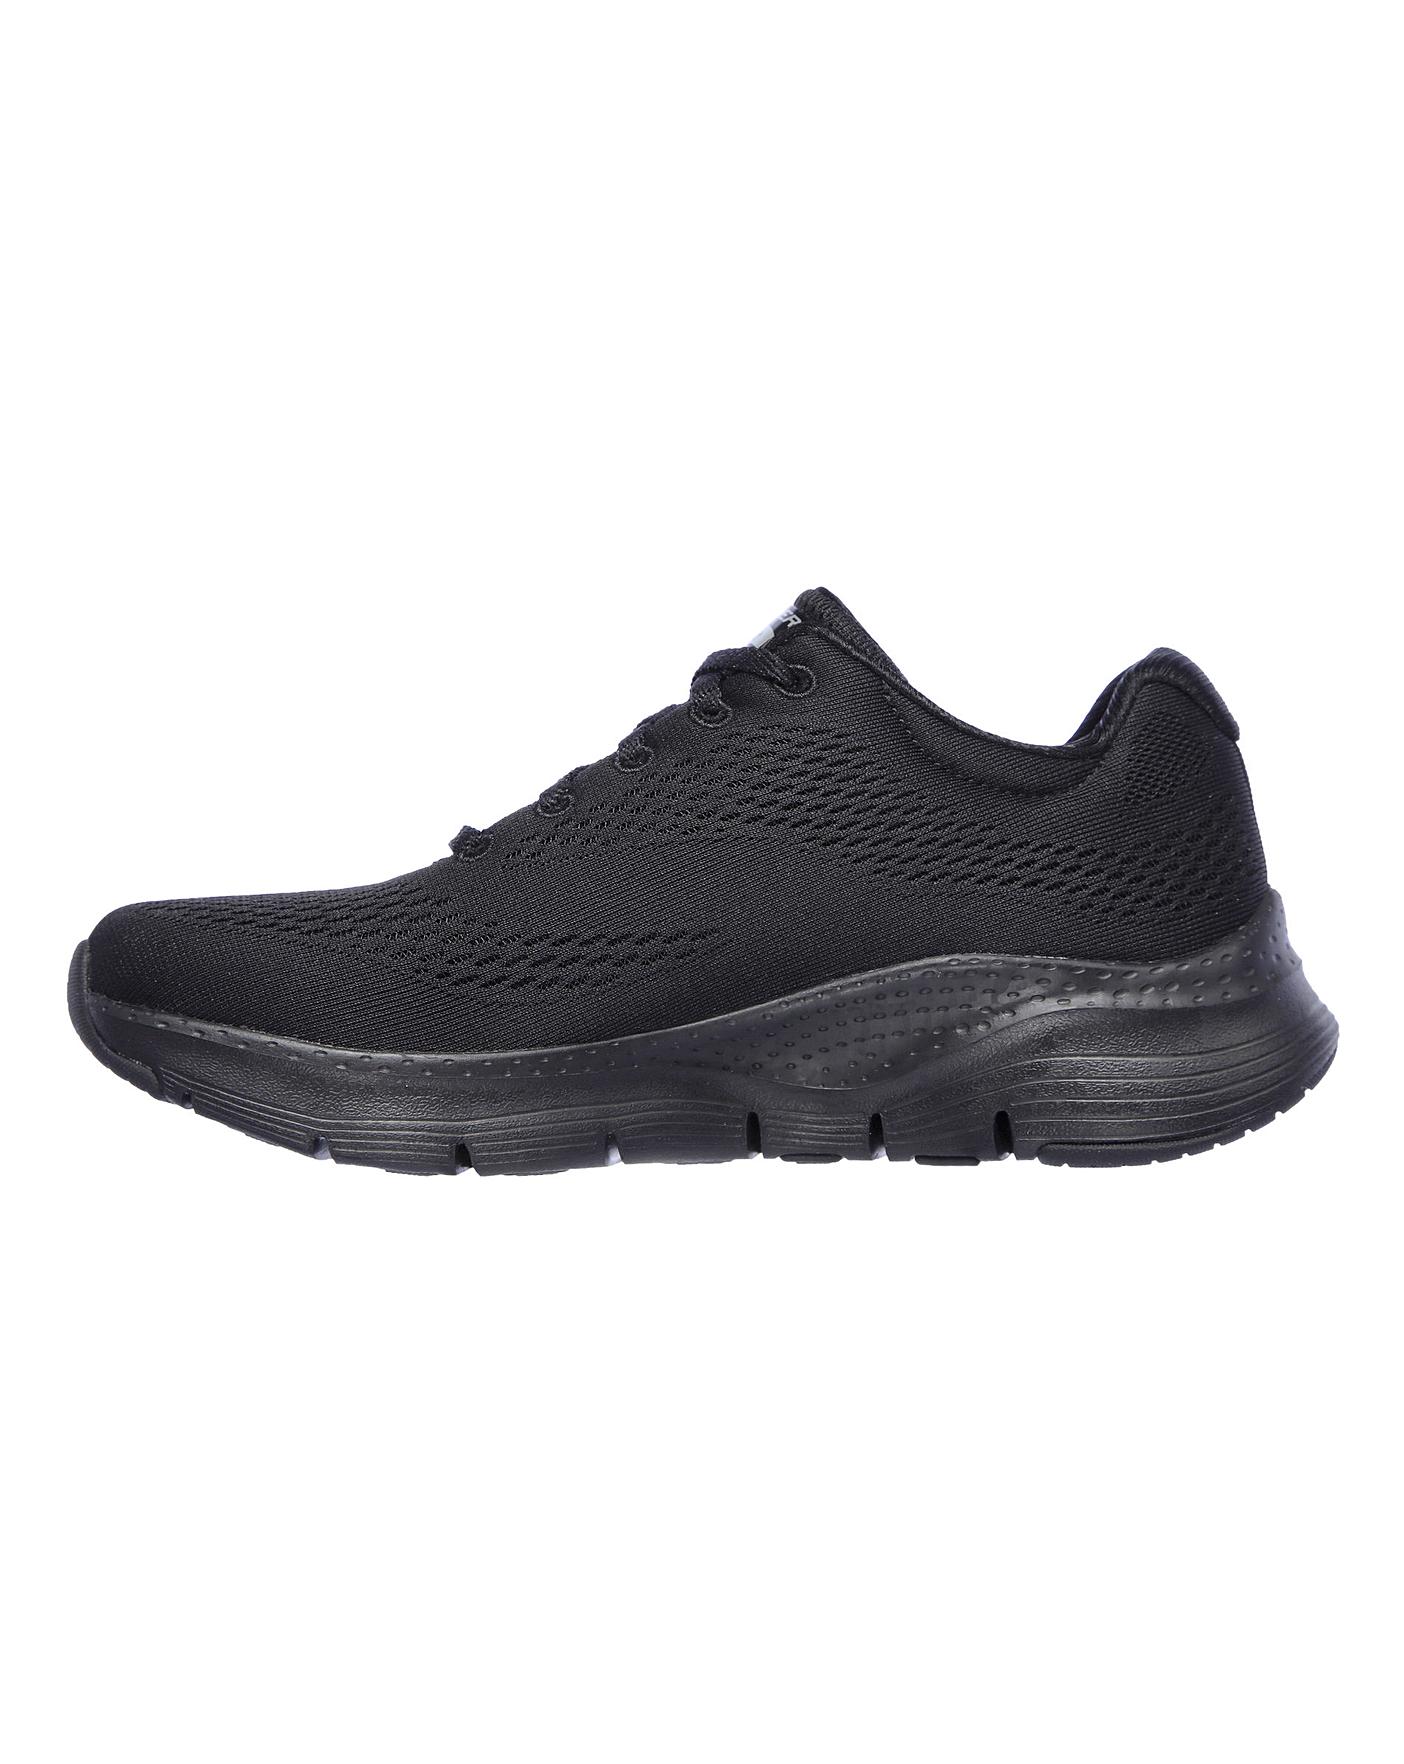 Skechers Arch Fit Big Appeal Trainers | J D Williams